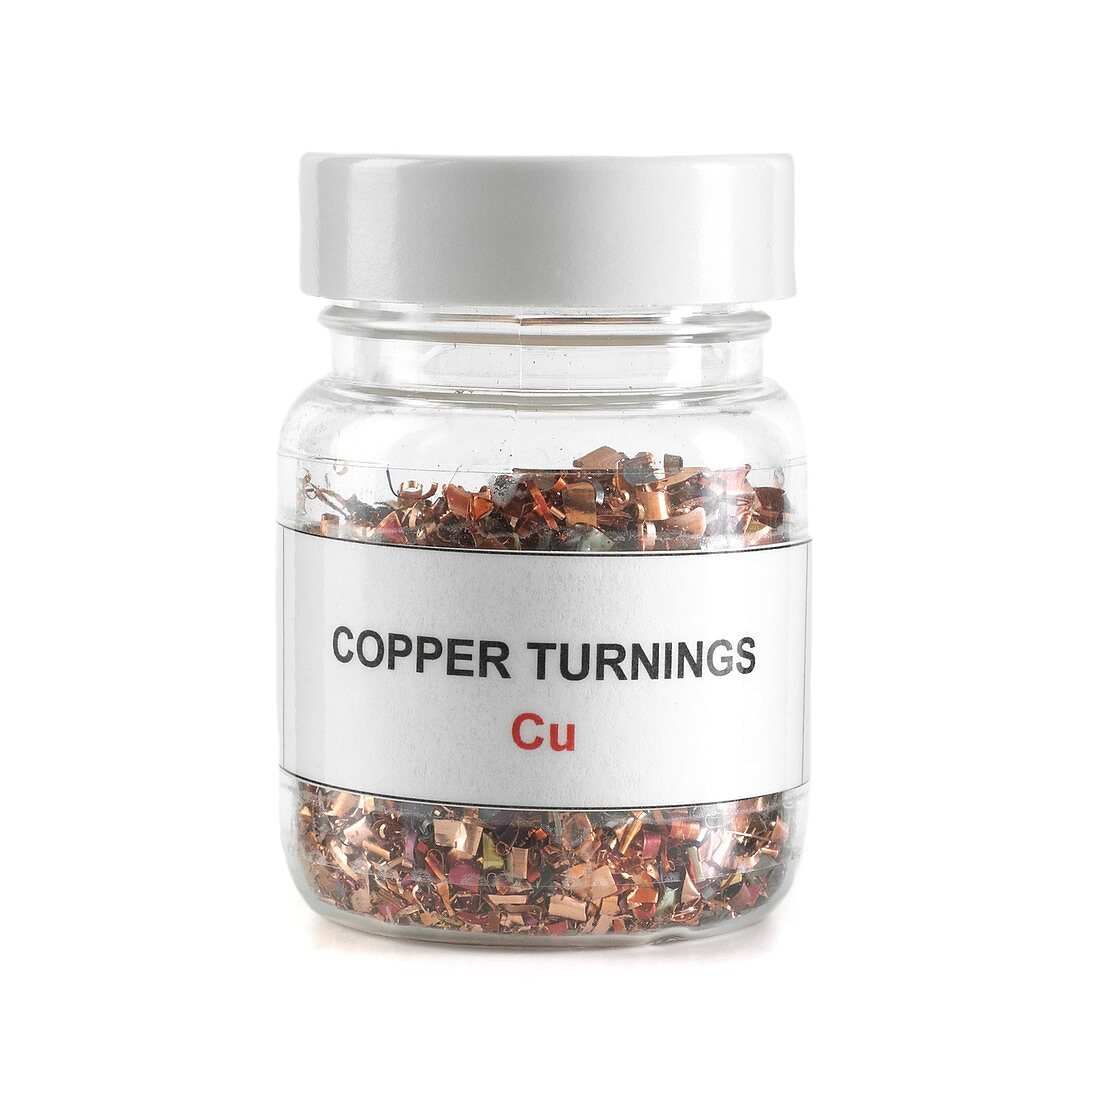 Jar containing copper turnings